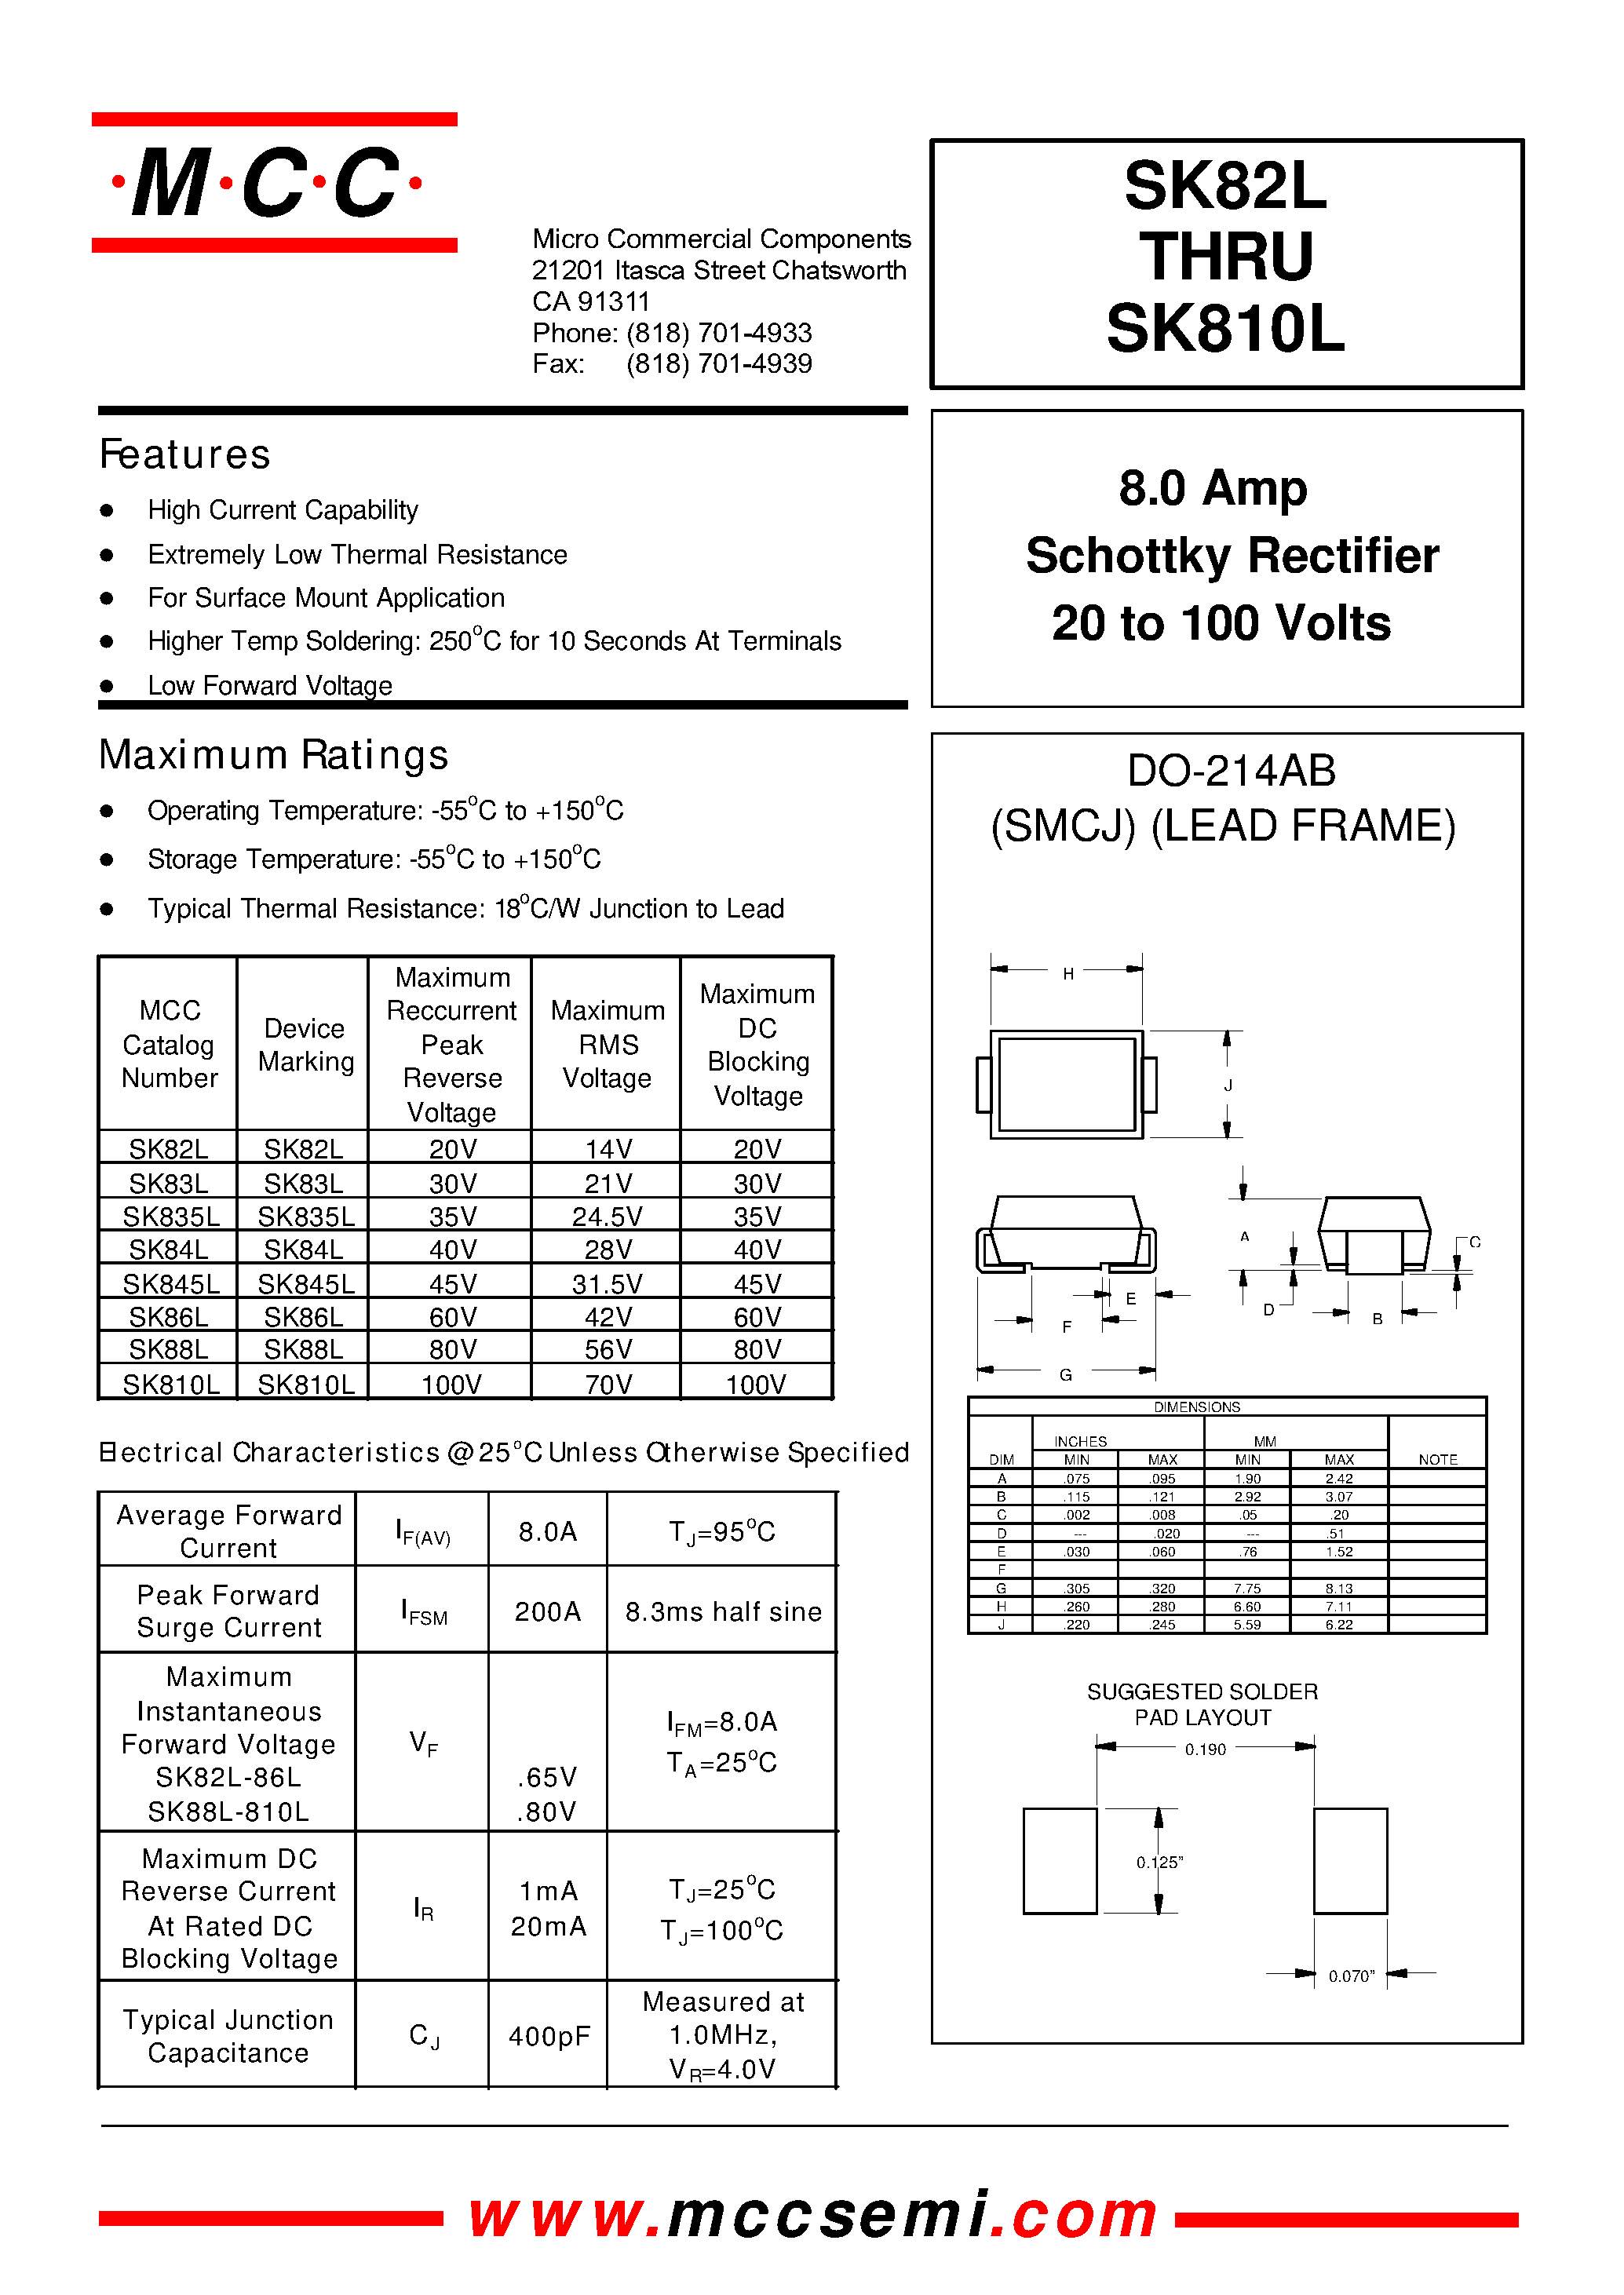 Datasheet SK810L - 8.0 Amp Schottky Rectifier 20 to 100 Volts page 1